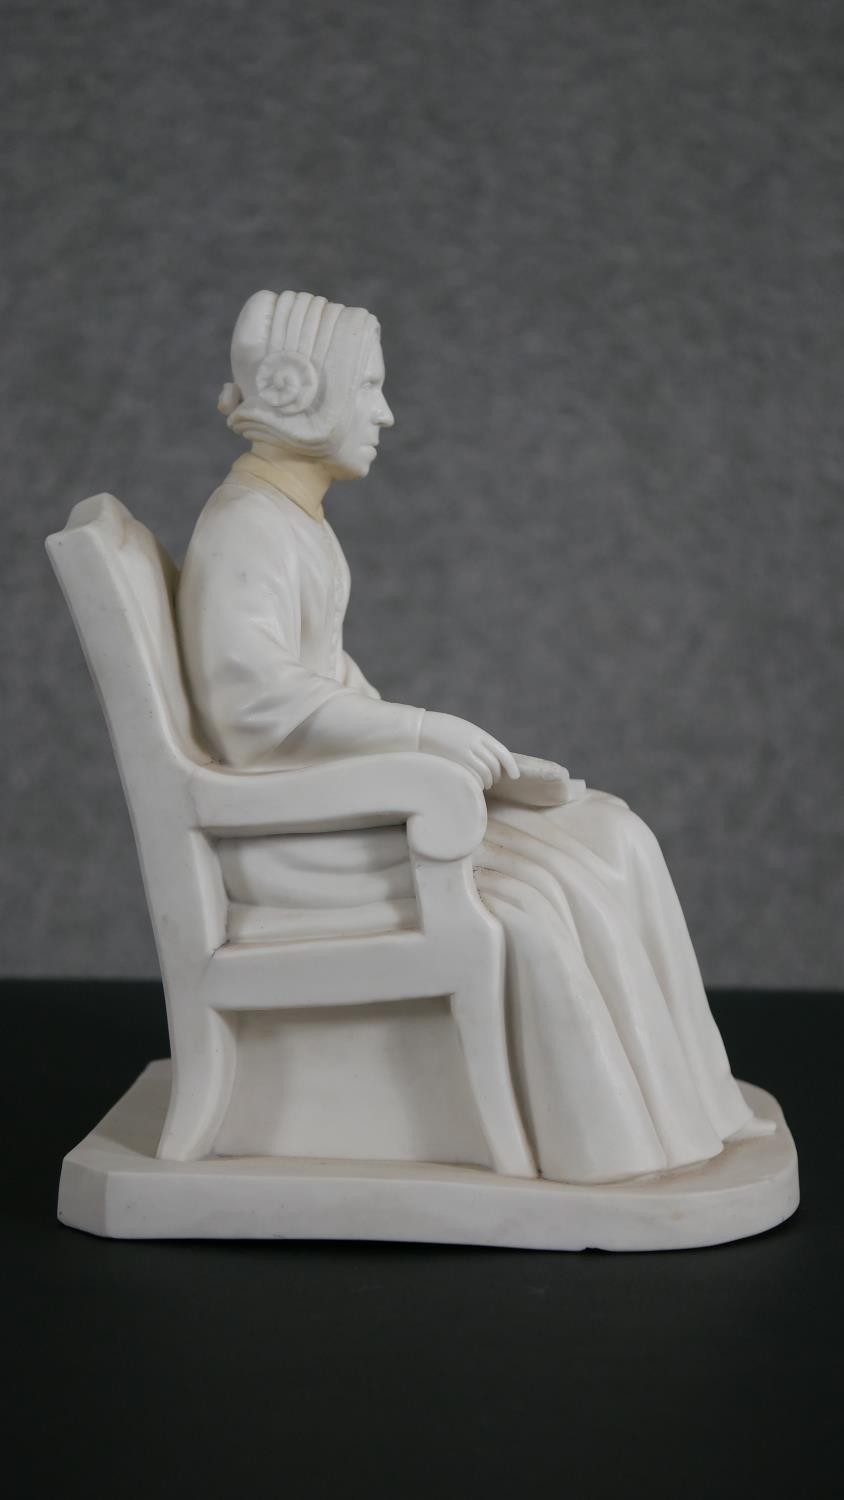 A Minton Parian ware model of an elderly lady seated in an armchair, a book open on her lap. - Image 2 of 8